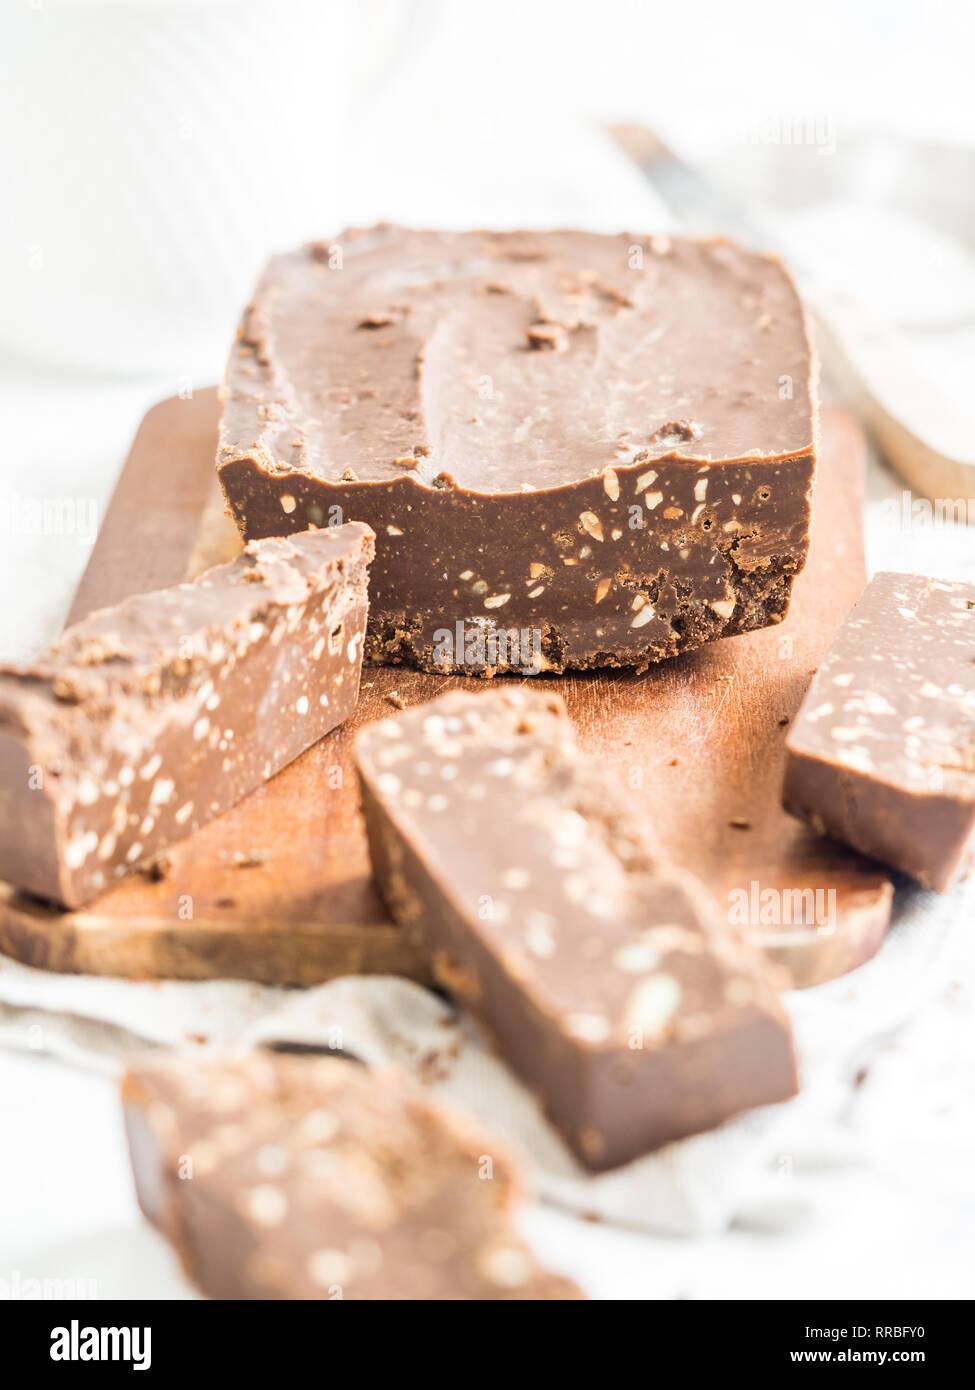 Preparation of homemade protein bars, made with peanut butter, hemp protein, cacao and cacao butter (vegan, sugar free) Stock Photo